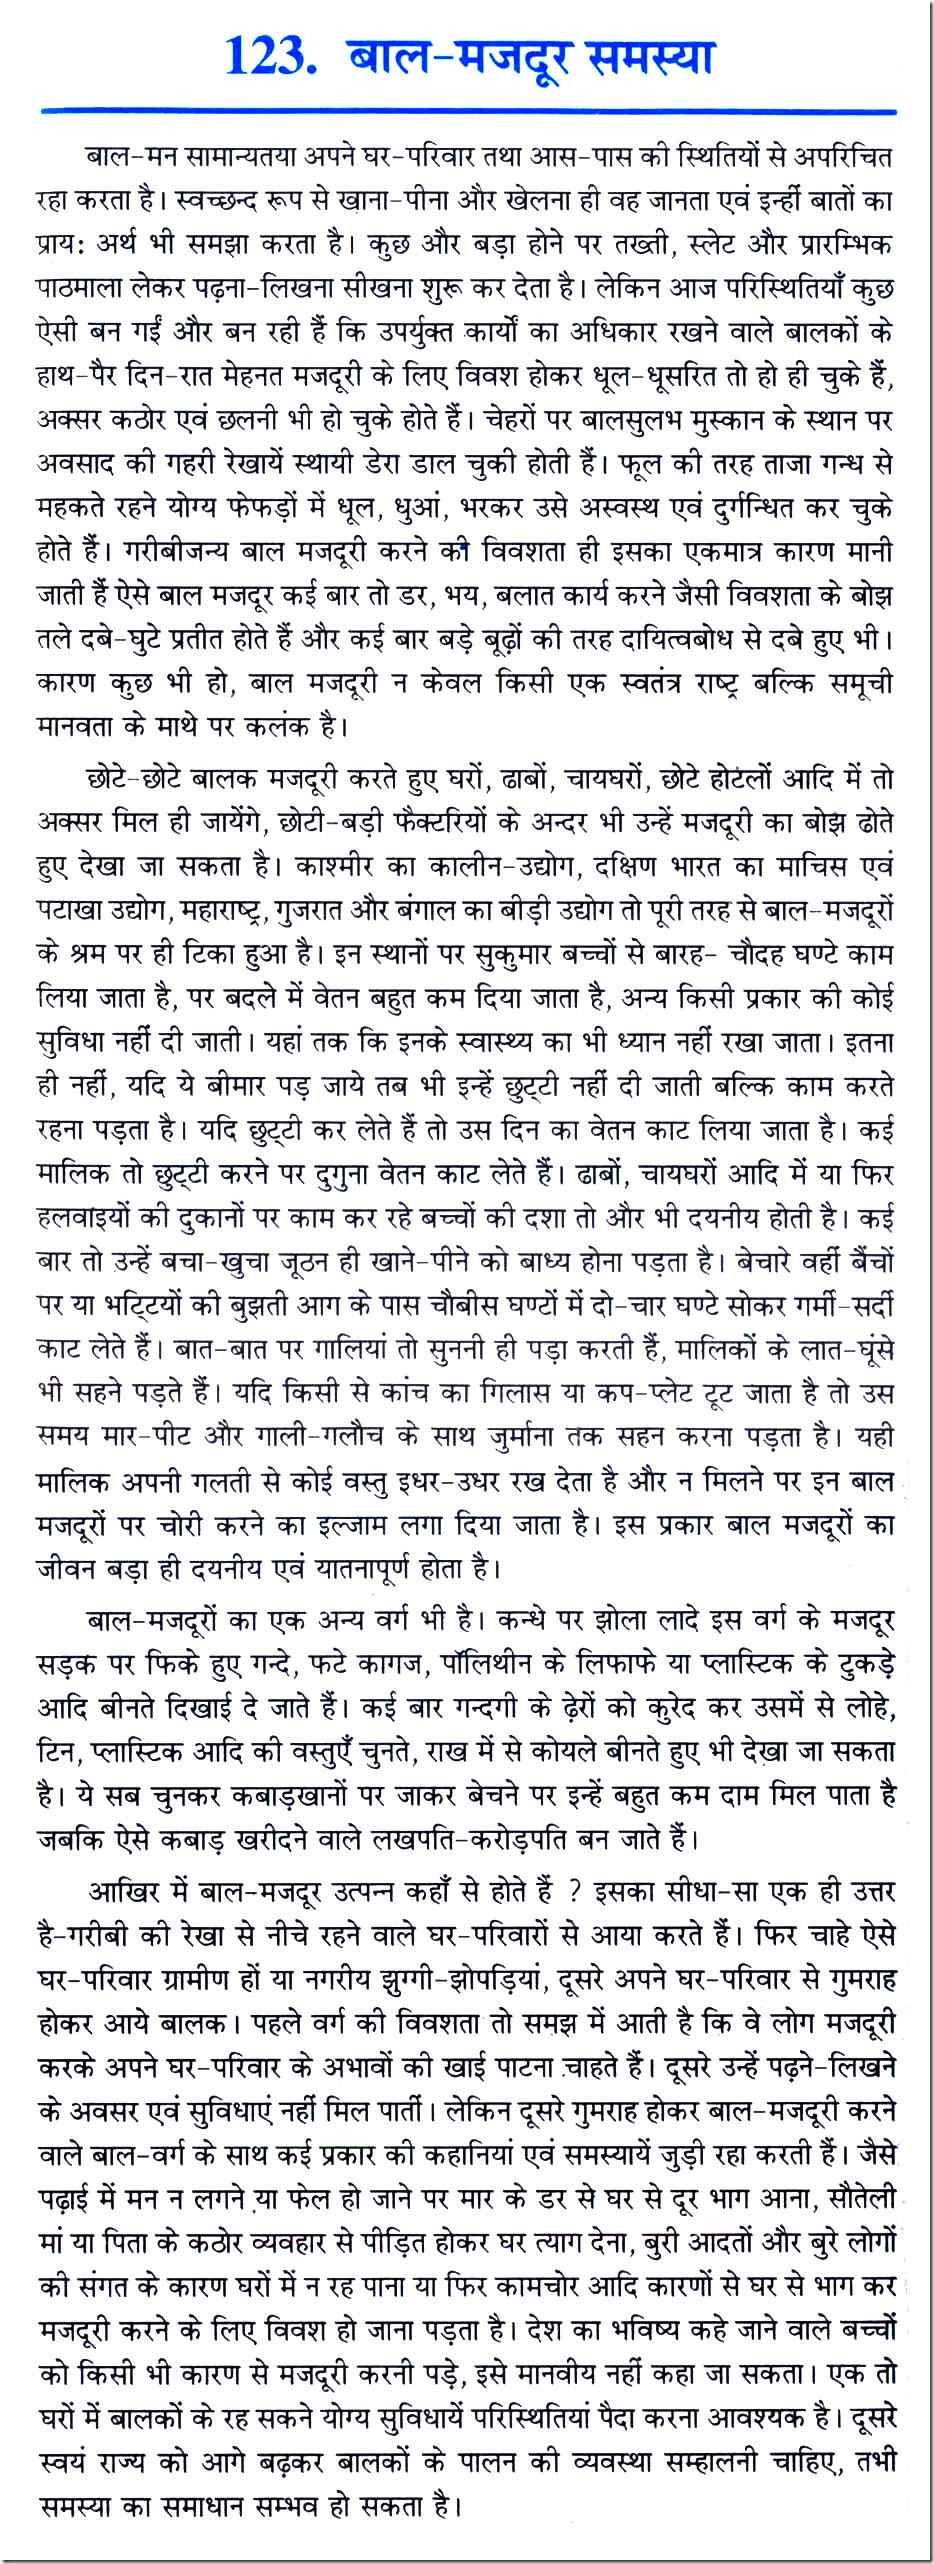 Short essay on human rights day in hindi